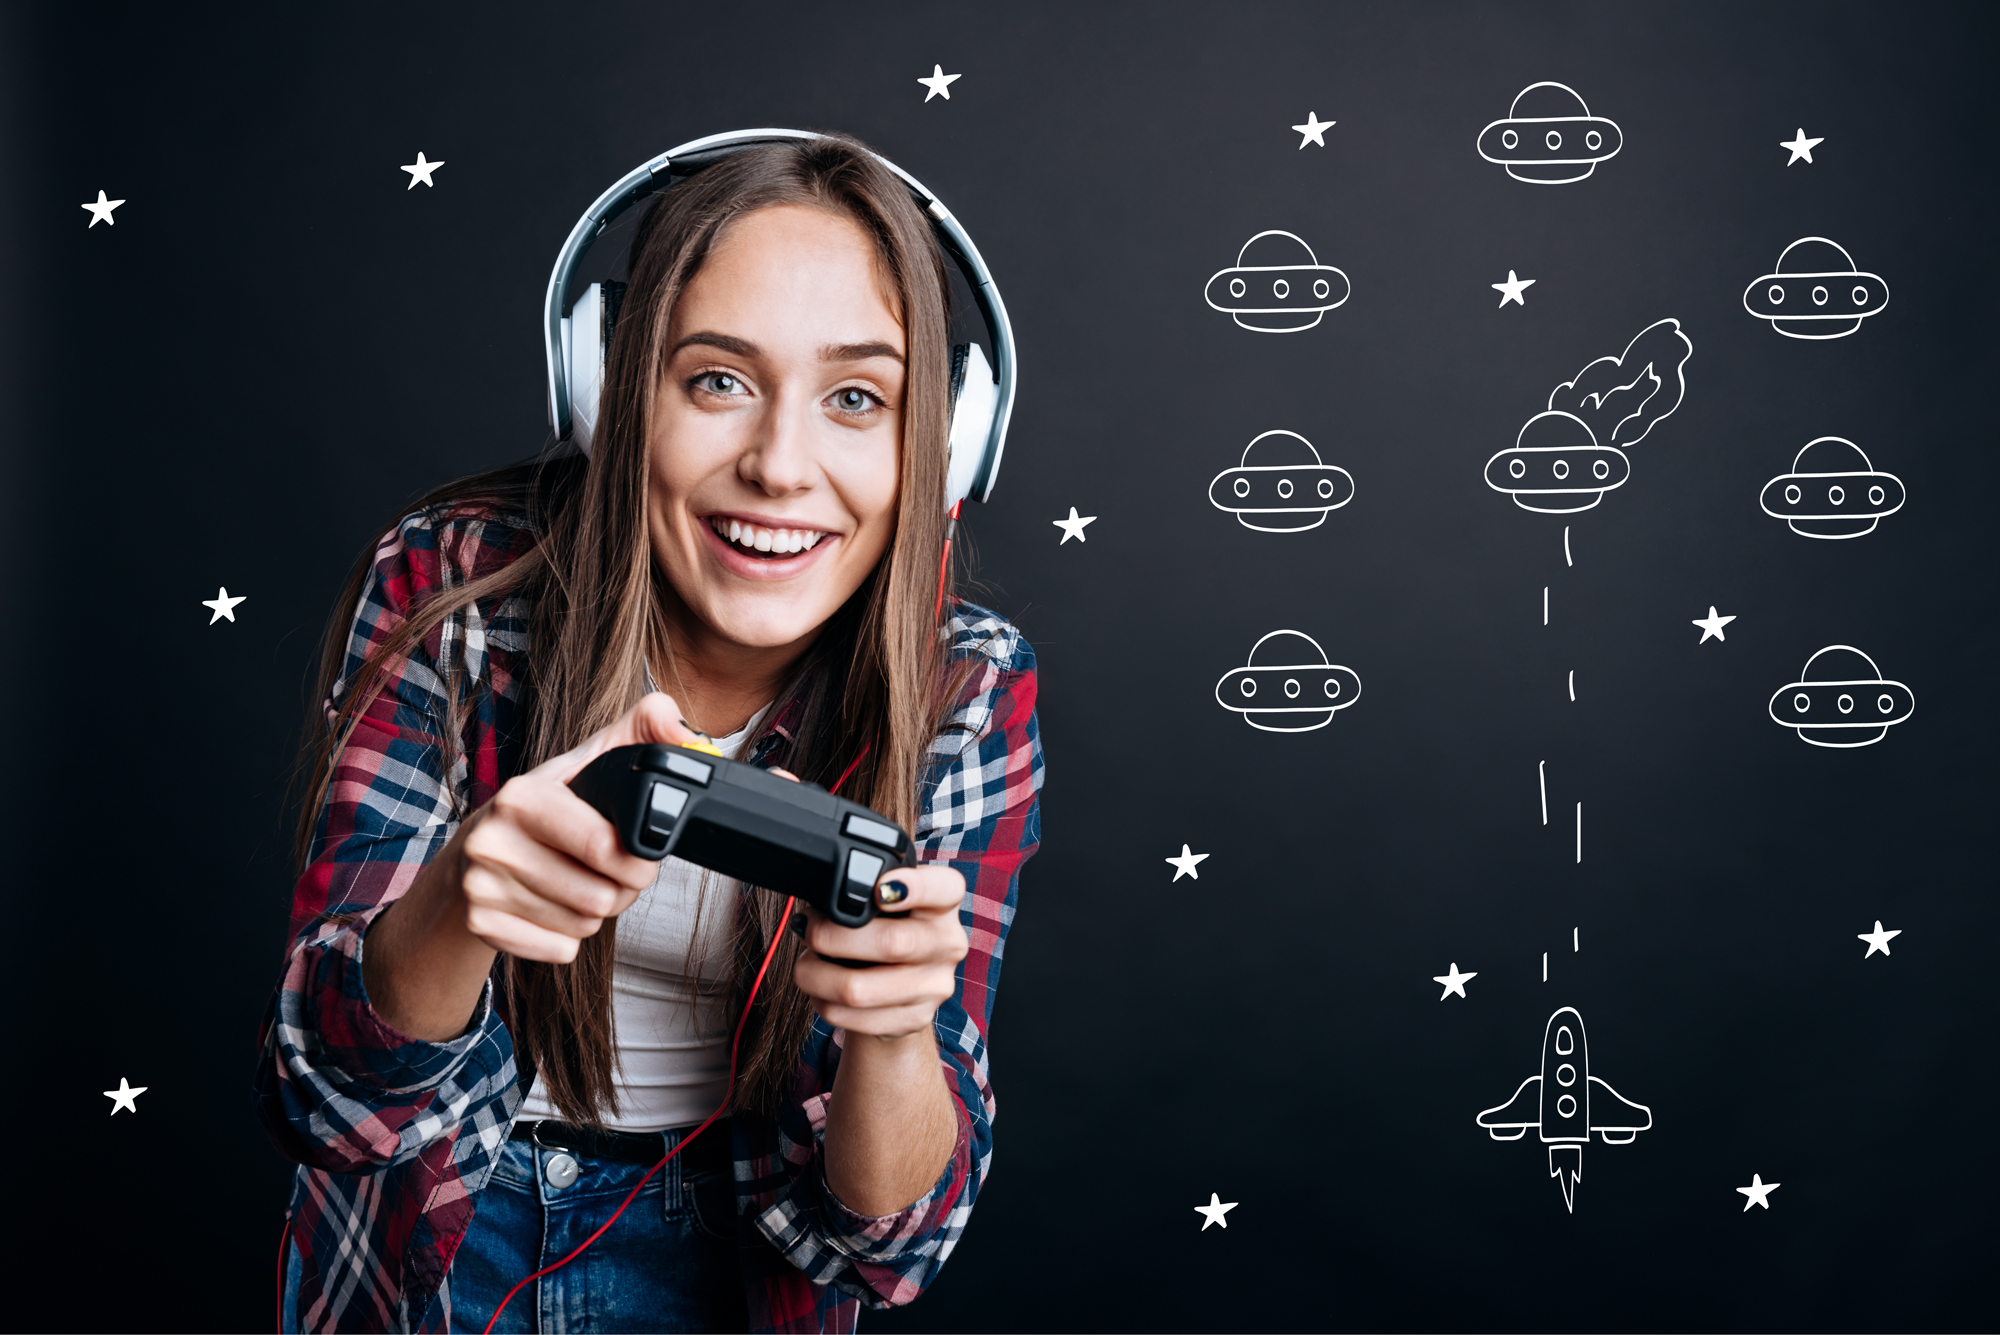 Cheerful delighted woman playing video games